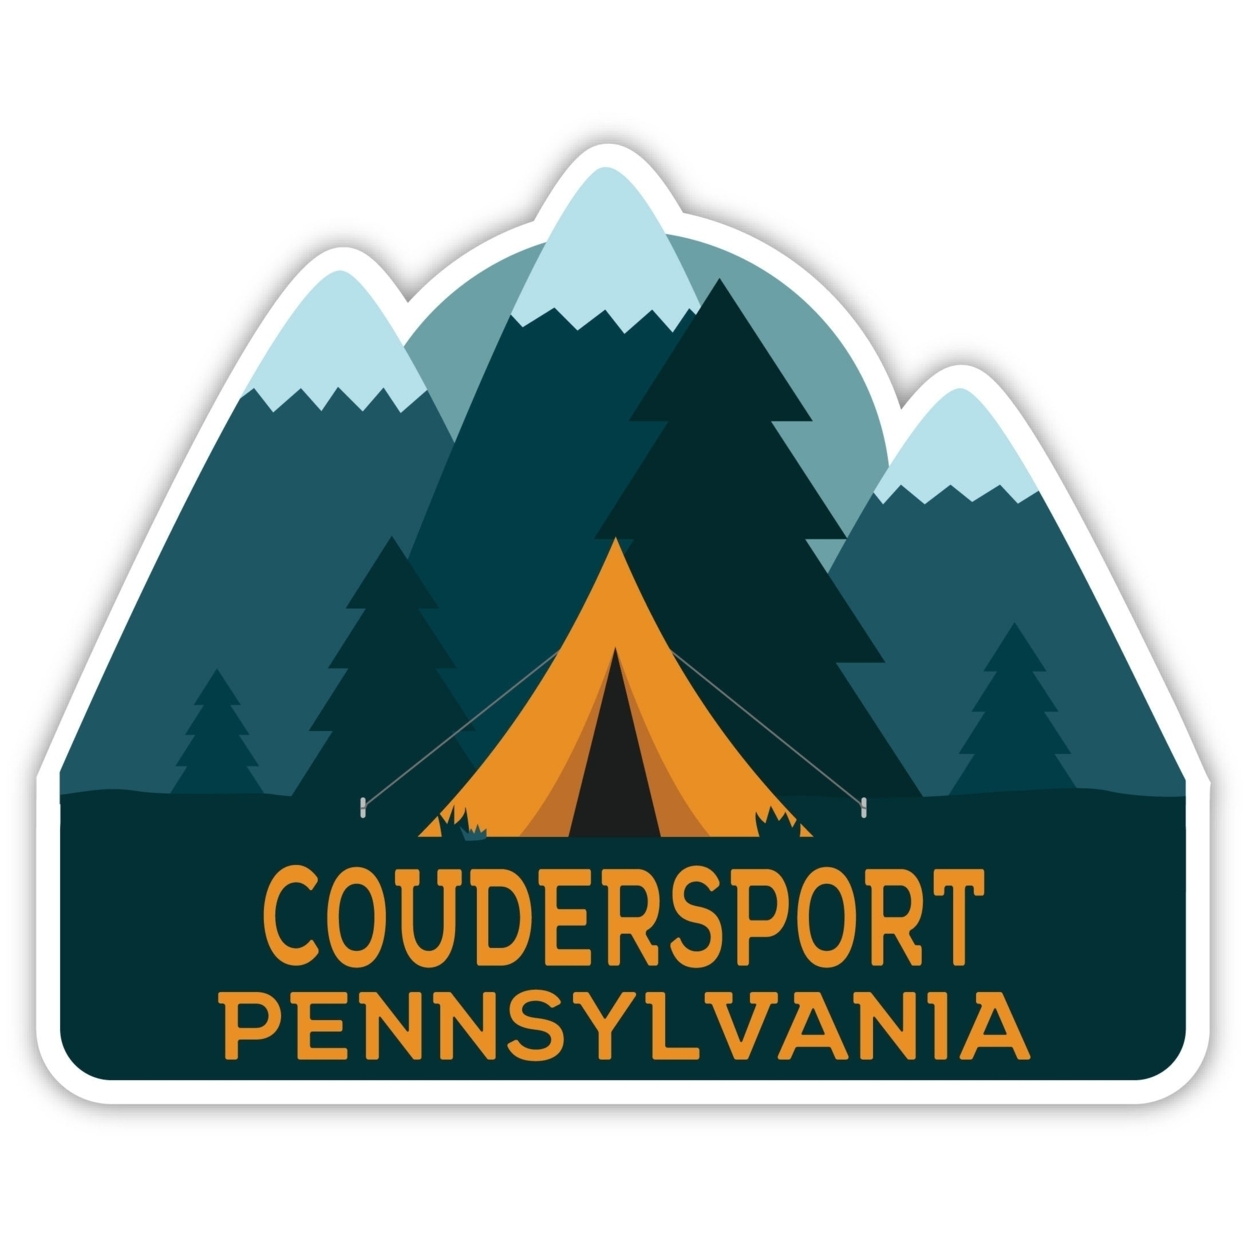 Coudersport Pennsylvania Souvenir Decorative Stickers (Choose Theme And Size) - 4-Pack, 6-Inch, Tent